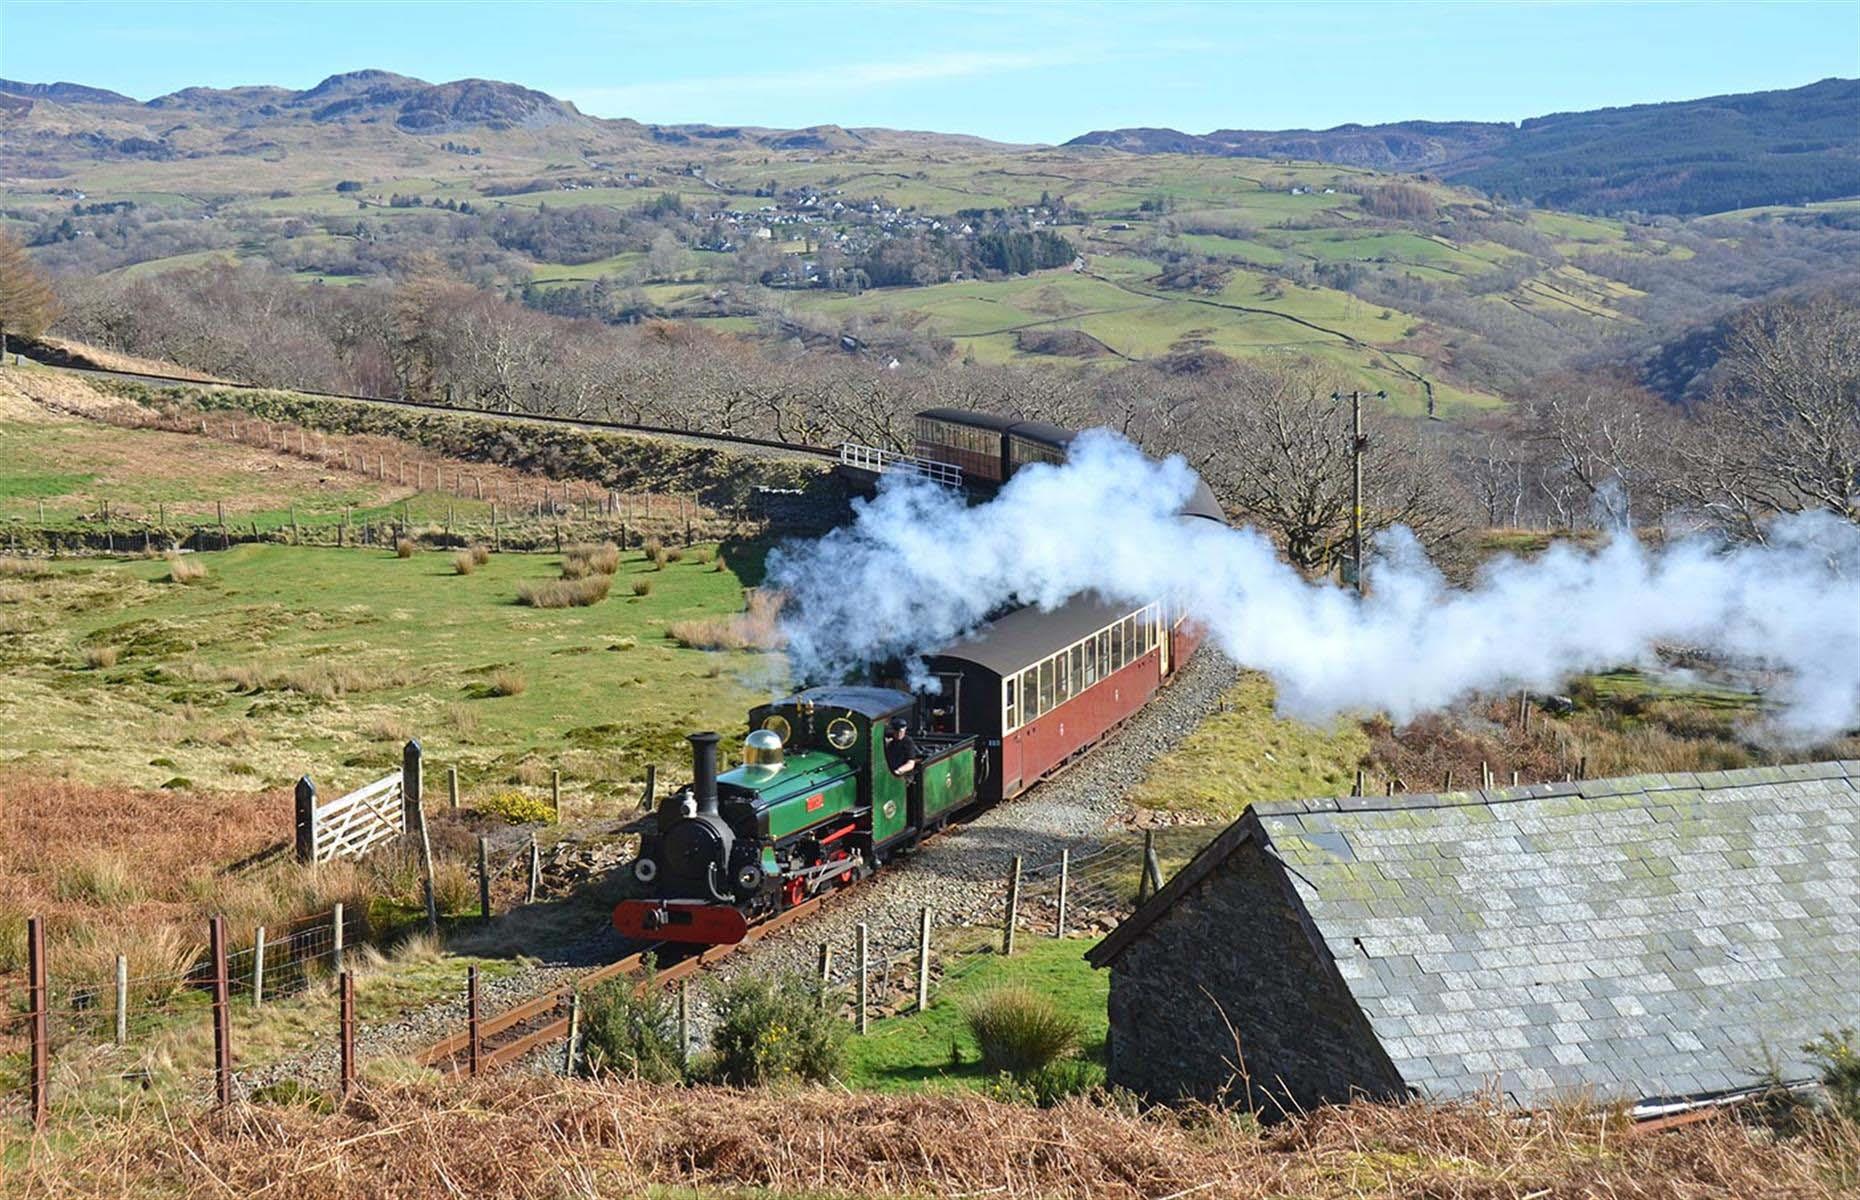 <p> Dating back more than 150 years, North Wales’ <a href="https://www.festrail.co.uk/mountain-spirit/">Mountain Spirit</a> service was rejuvenated in 1982, following a three decade-long restoration. The nostalgic steam train journey begins in the charming village of Blaenau Ffestiniog, crossing over the Cob embankment and climbing up the valley past woodlands and fields, before stopping at pretty Tan-y-Bwlch. The scenic 13.5-mile (21.7km)  journey ends in Porthmadog, a port town and narrow-gauge railway hub.</p>